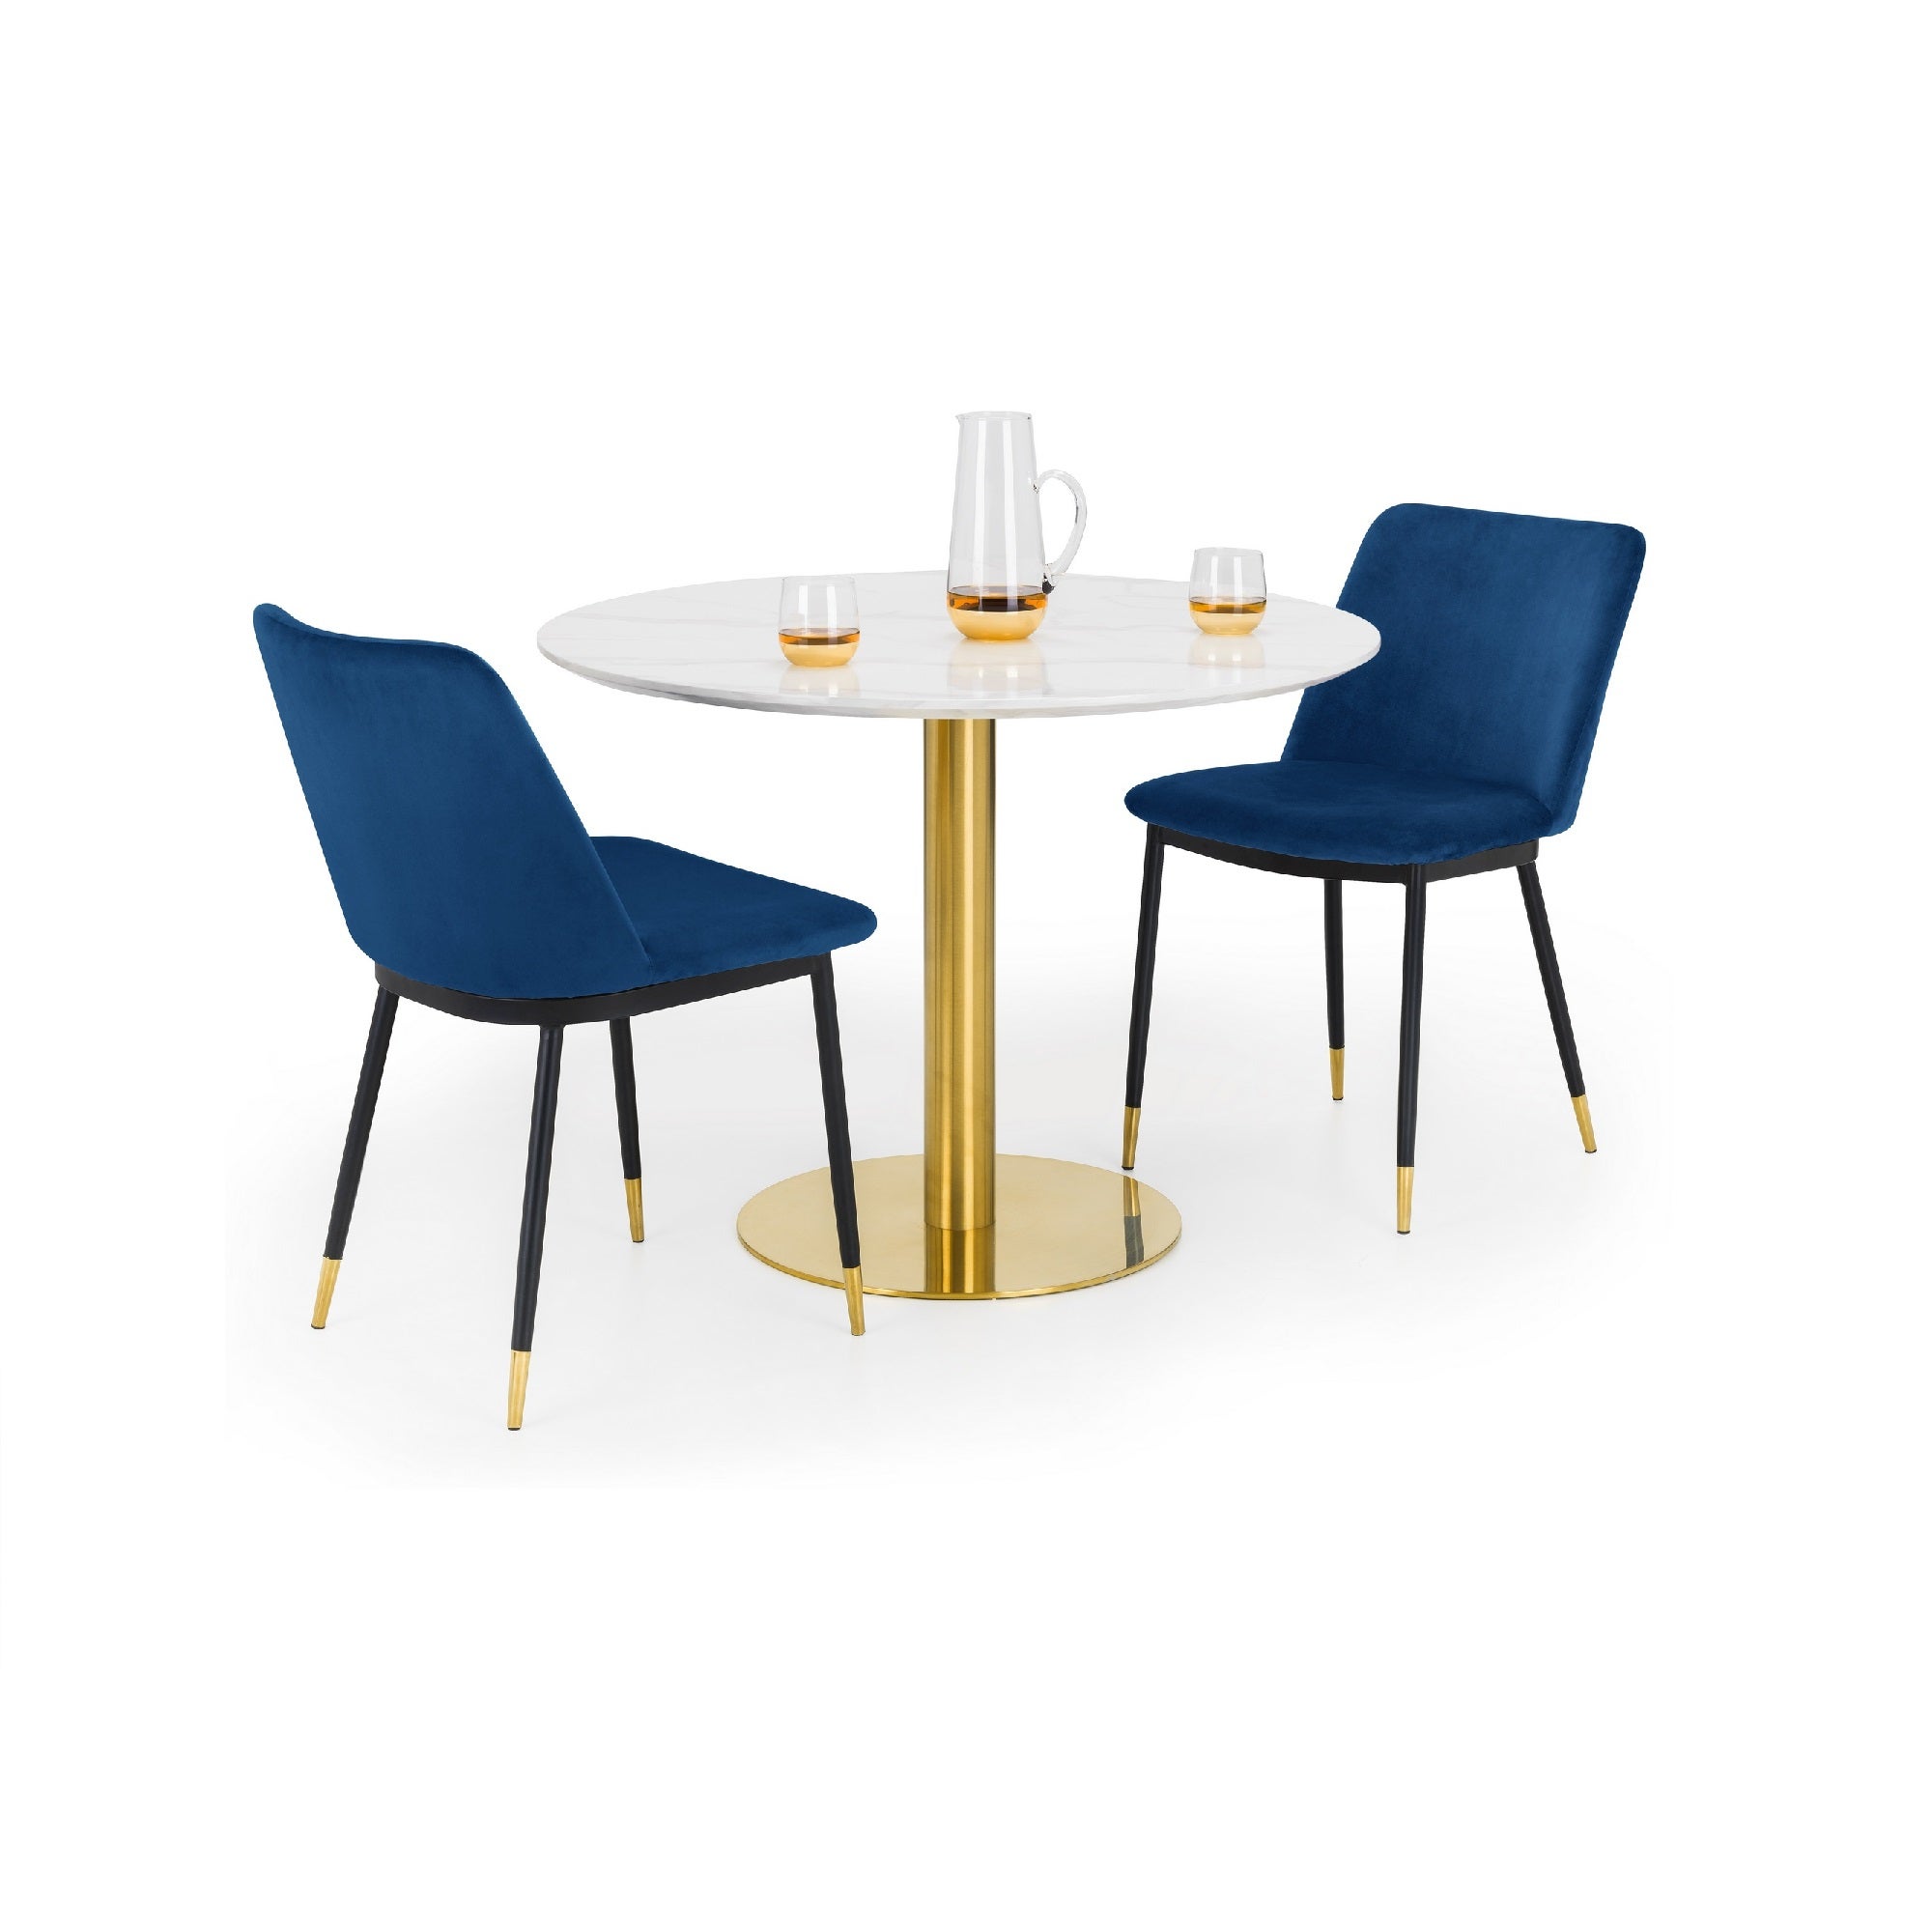 Palermo Round Dining Table With 2 Delaunay Chairs Blue